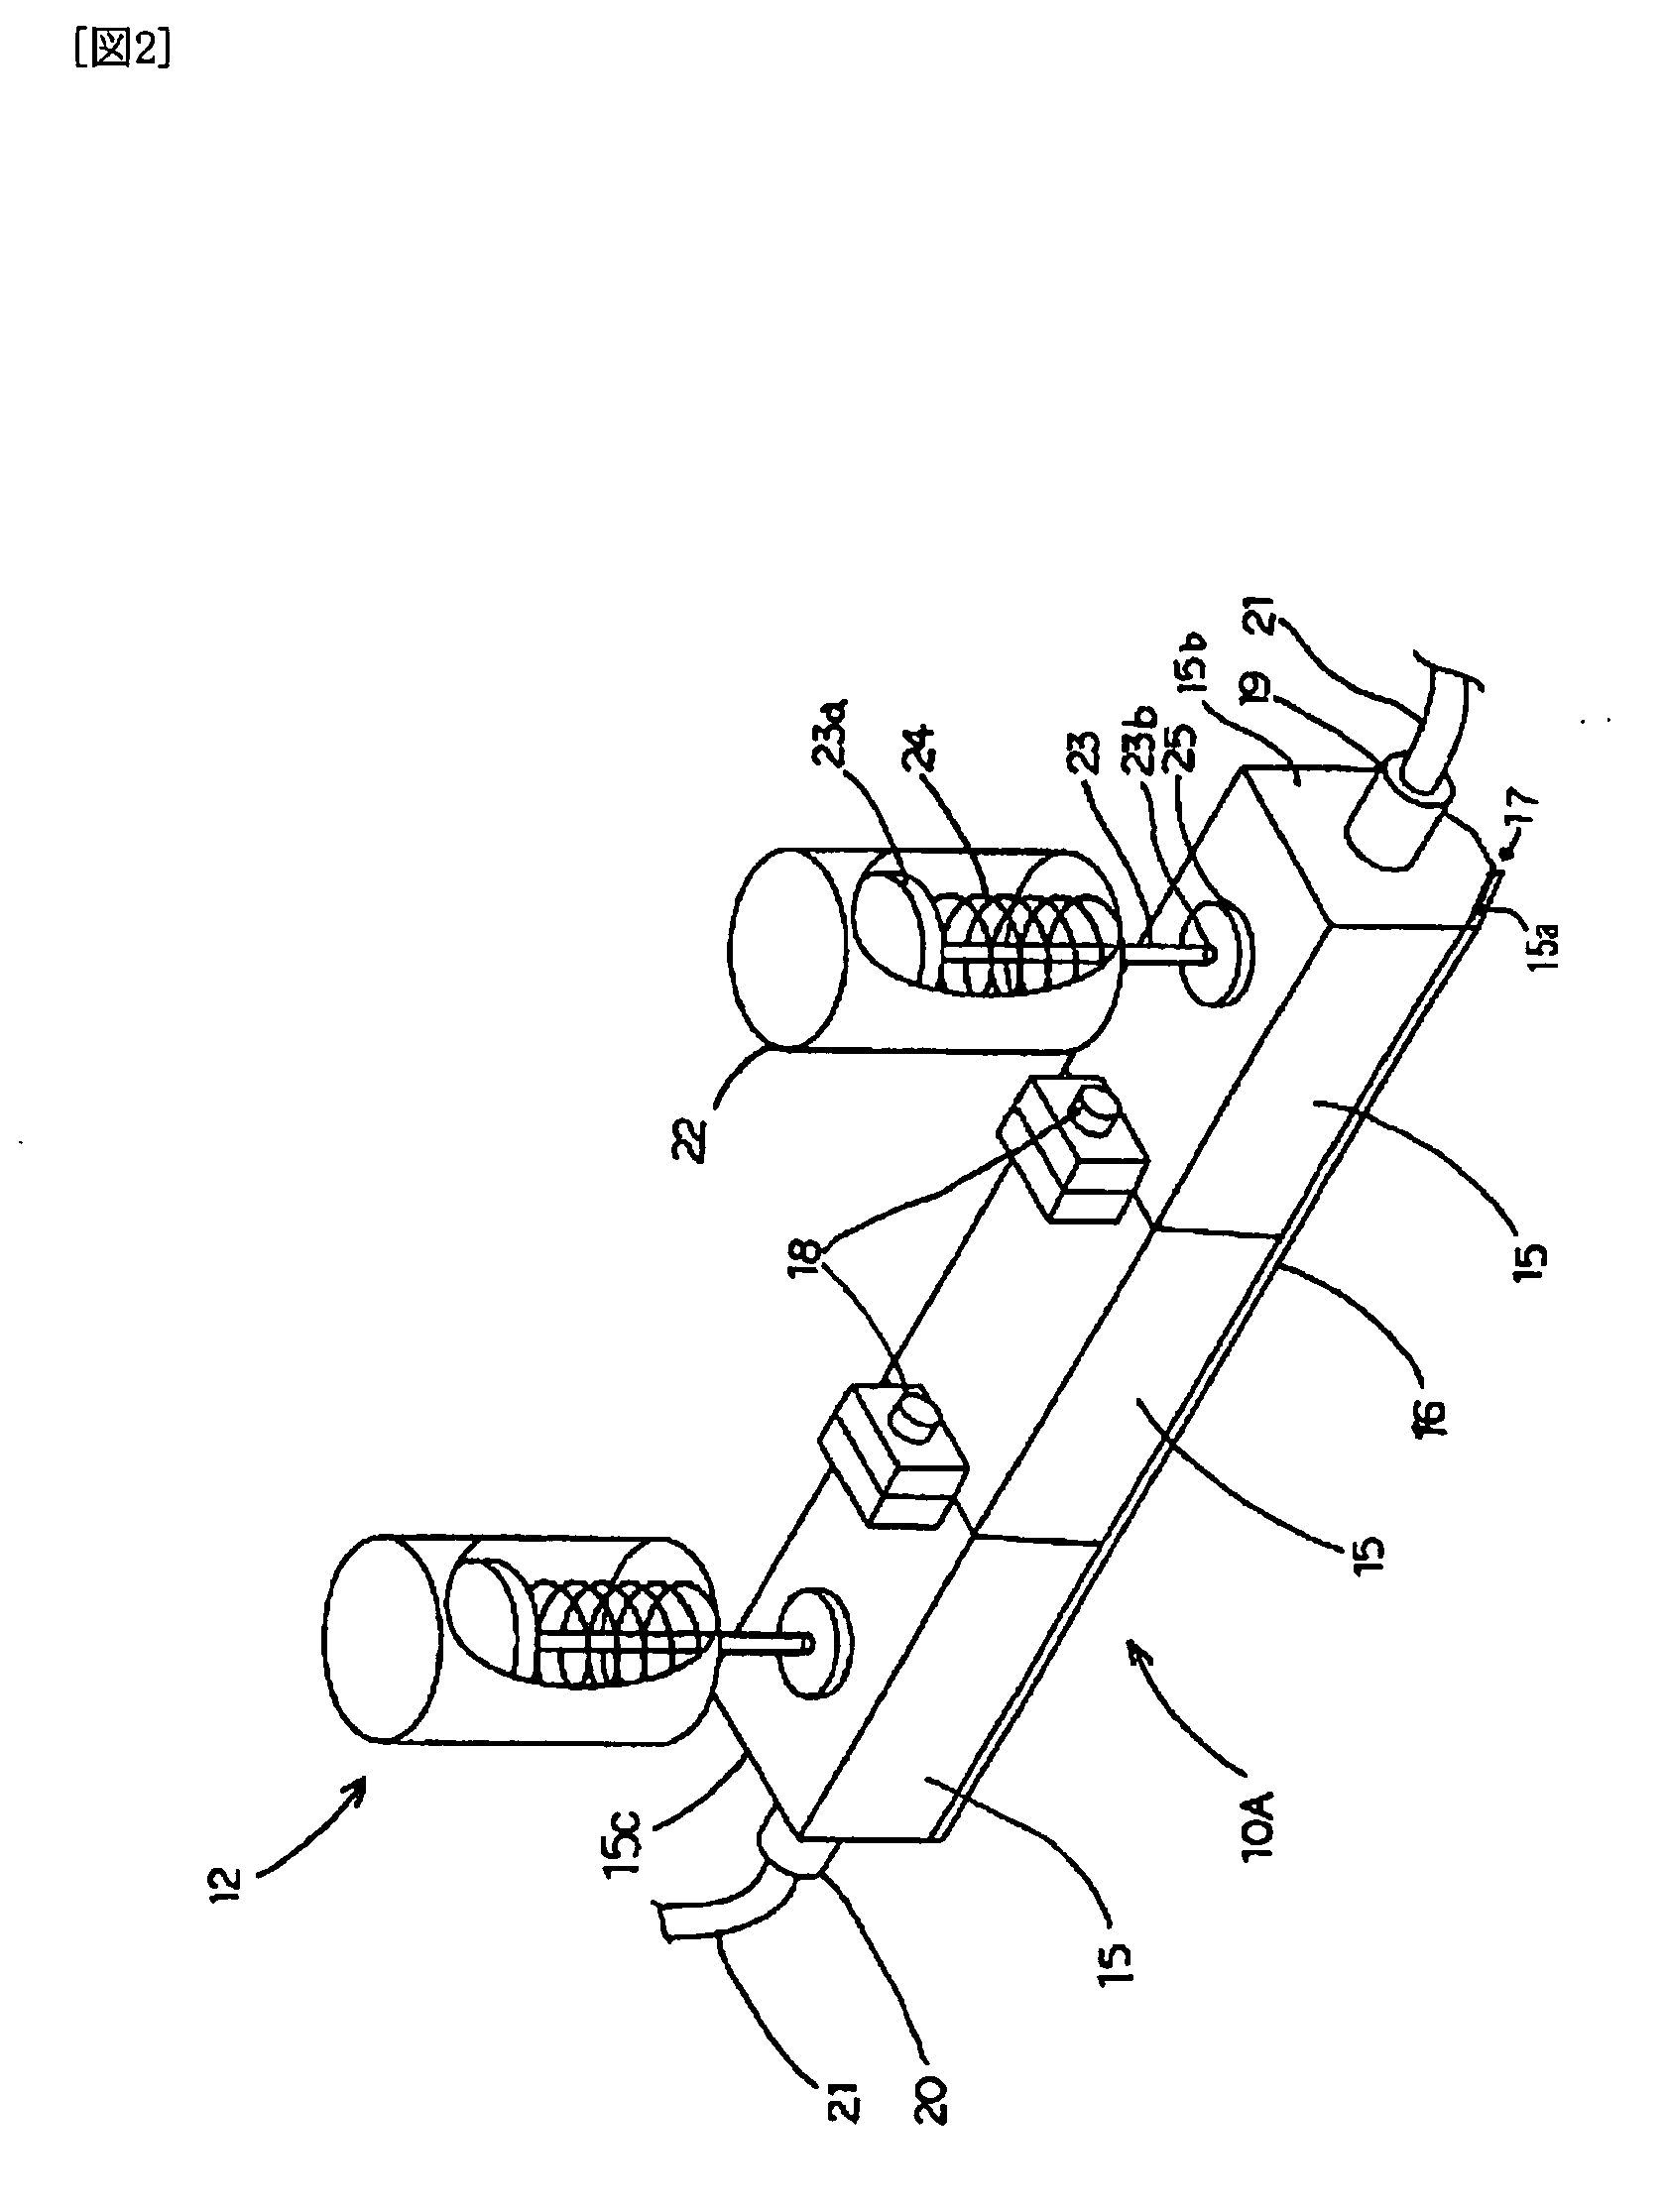 Method for Removing Deposit from Substrate and Method for Drying Substrate, as Well as Apparatus for Removing Deposit from Substrate and Apparatus for Drying Substrate Using These Methods